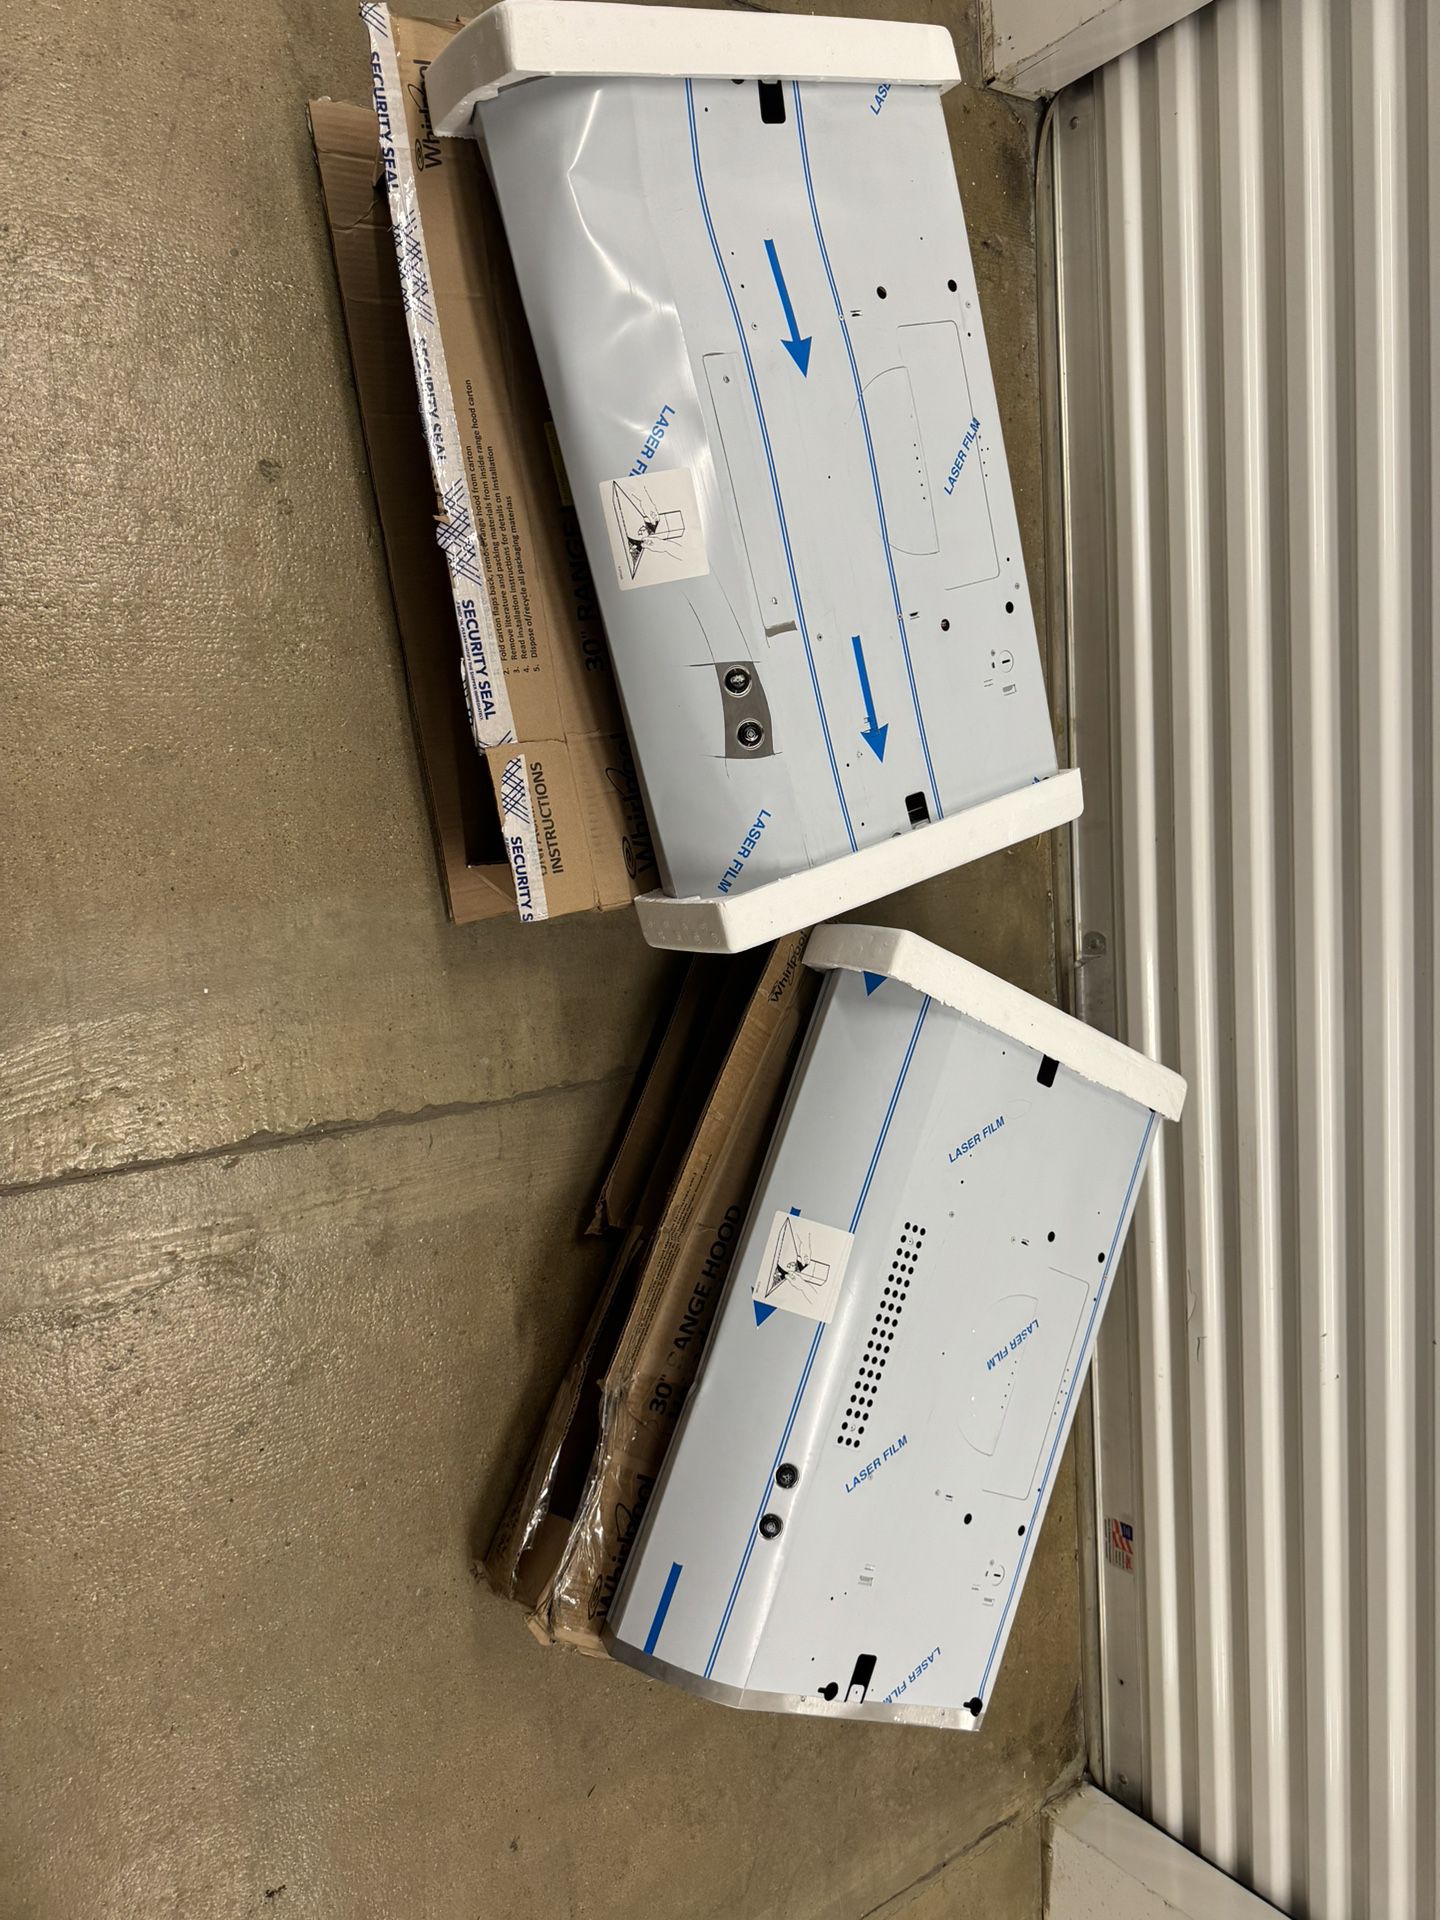 Whirlpool 30" Recirculating Range Hood with dents 100$ for both